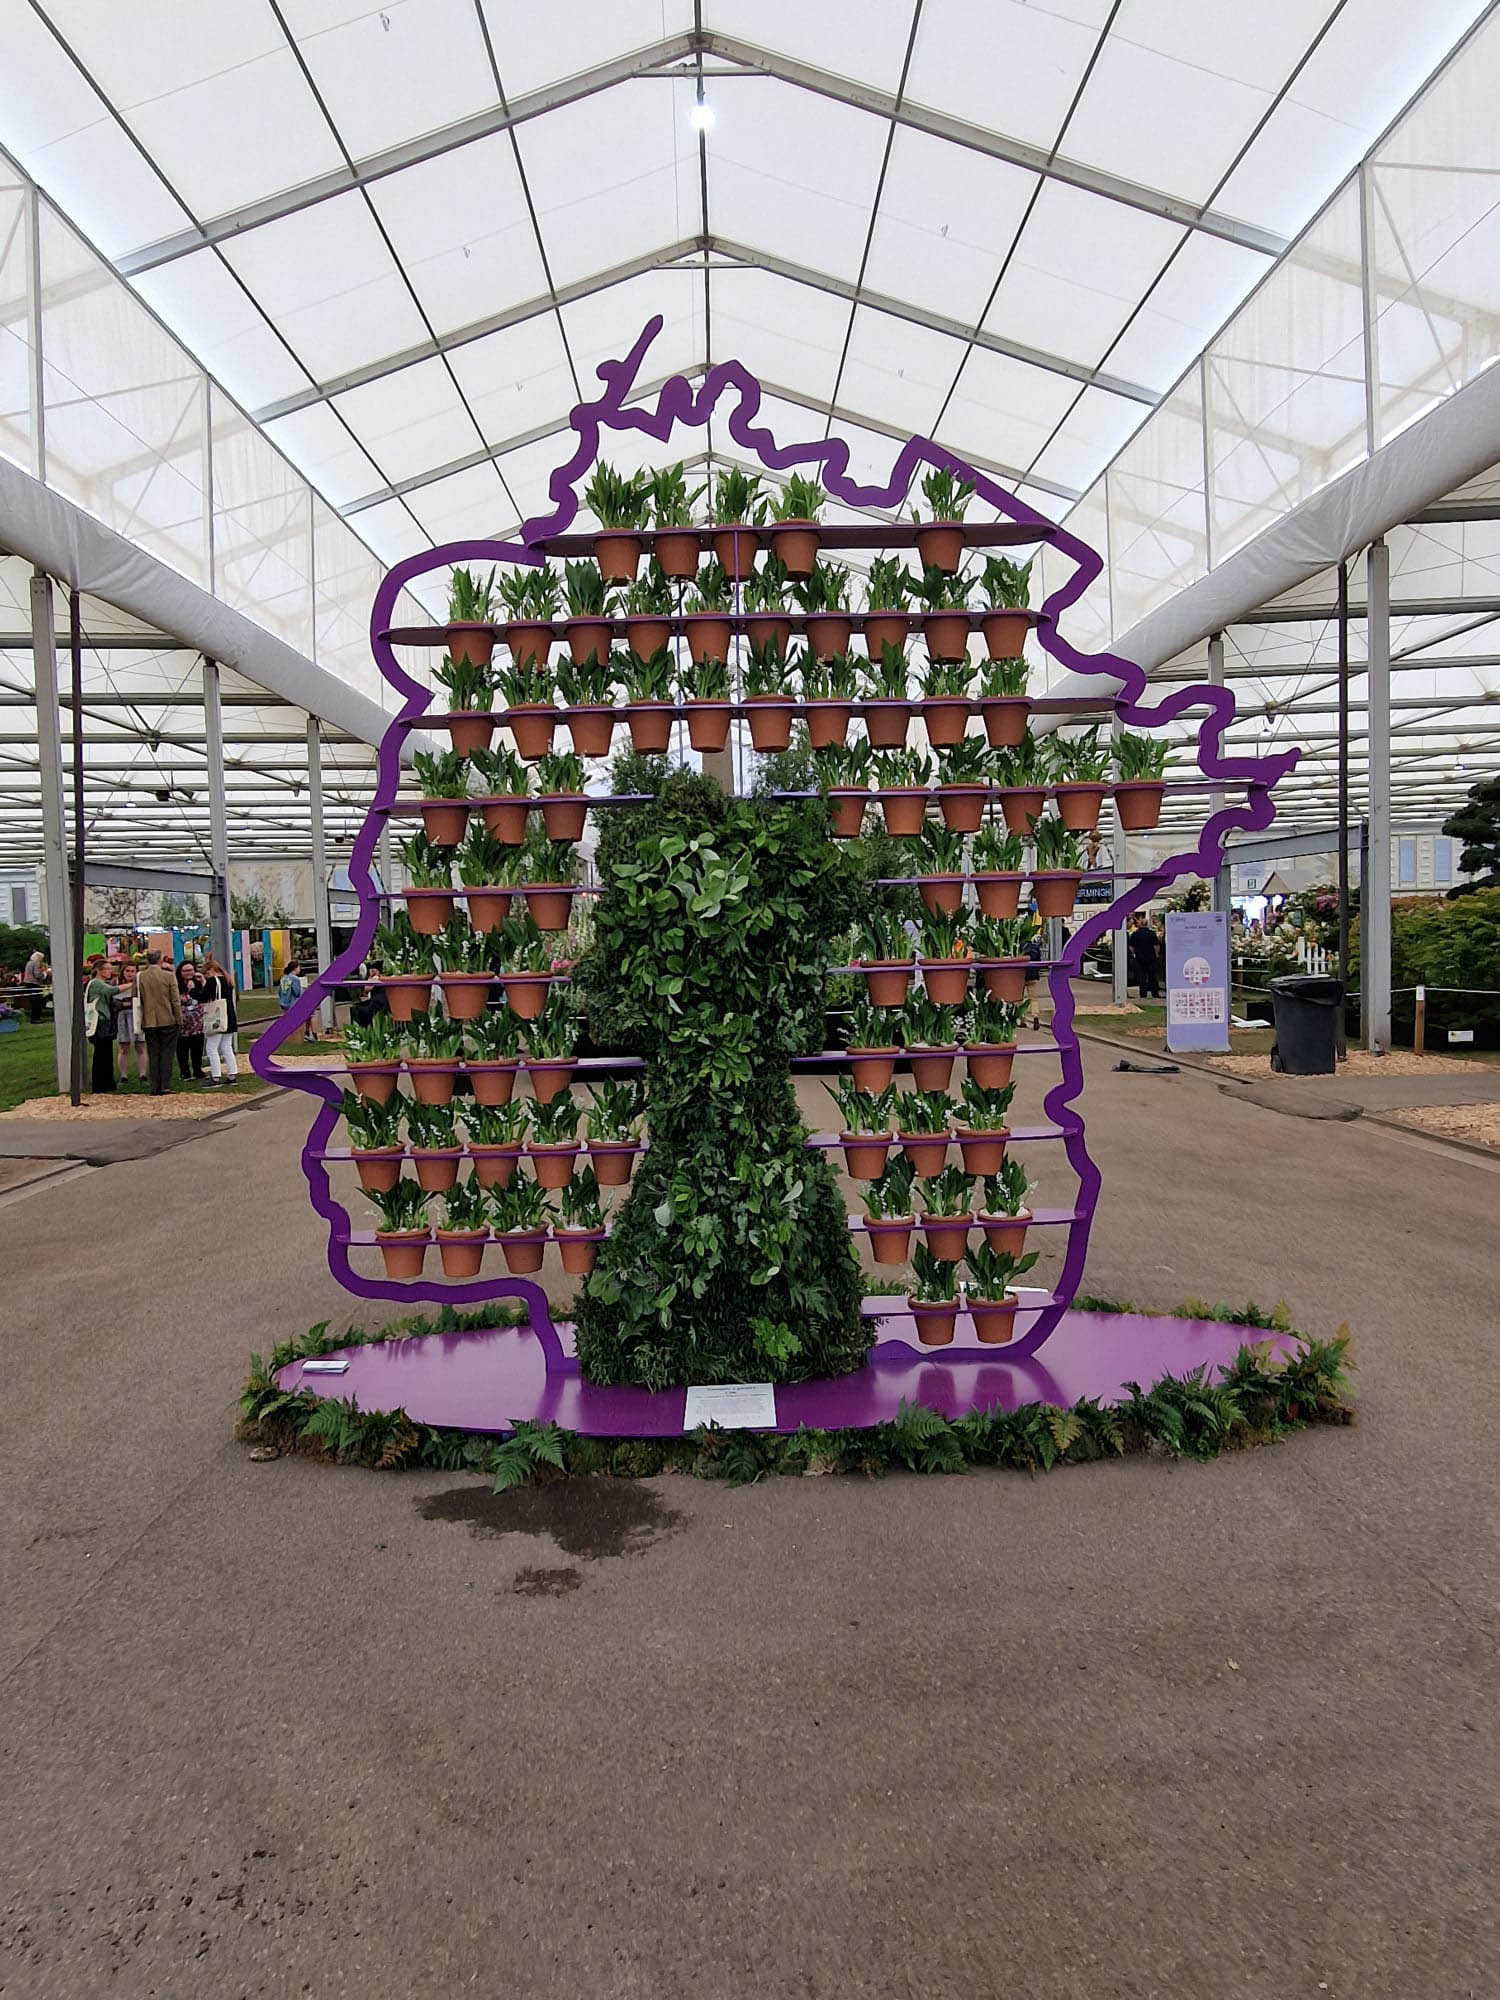 Amazing 3D silhouette portrait of the Queen made from foliage and 70 pots of HRM favourite flower Lilly of the valley representing 70 years on the thrown as part of the jubilee celebrations in the gardens by Simon Lycett designer